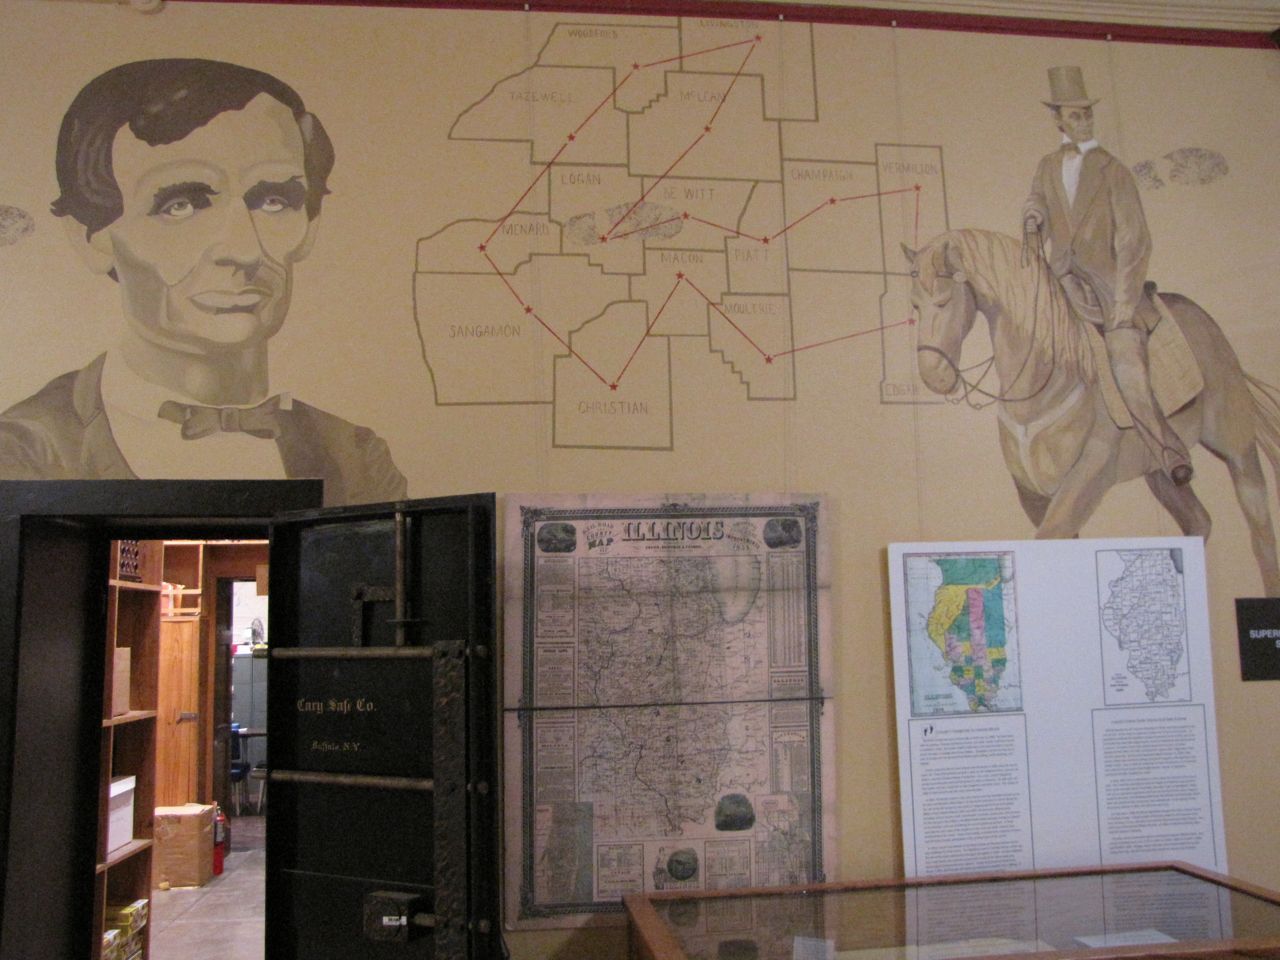 A wall dedicated to our 16th President in the "Lincoln Wing"